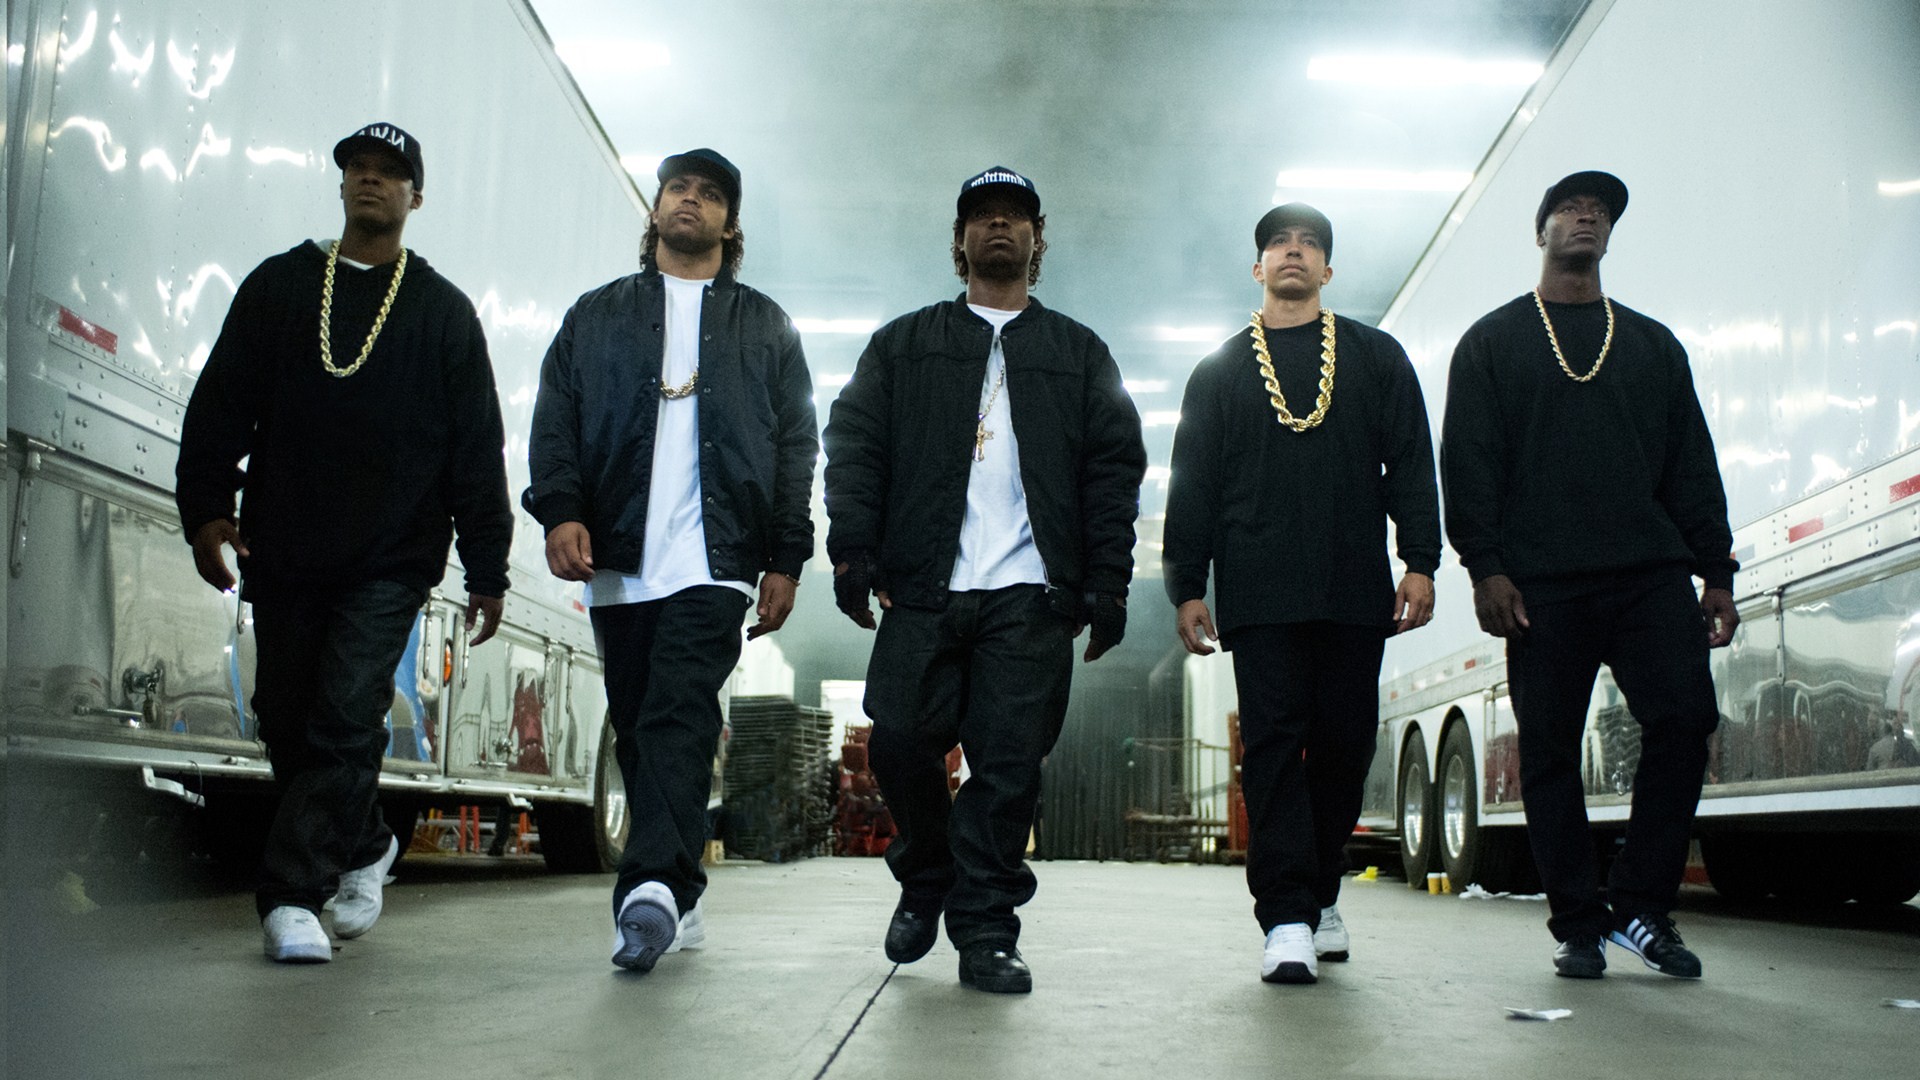 ‘STRAIGHT OUTTA COMPTON’ SUGGESTS WHAT REALLY HAPPENED ISN’T AS IMPORTANT AS WHAT REALLY SELLS